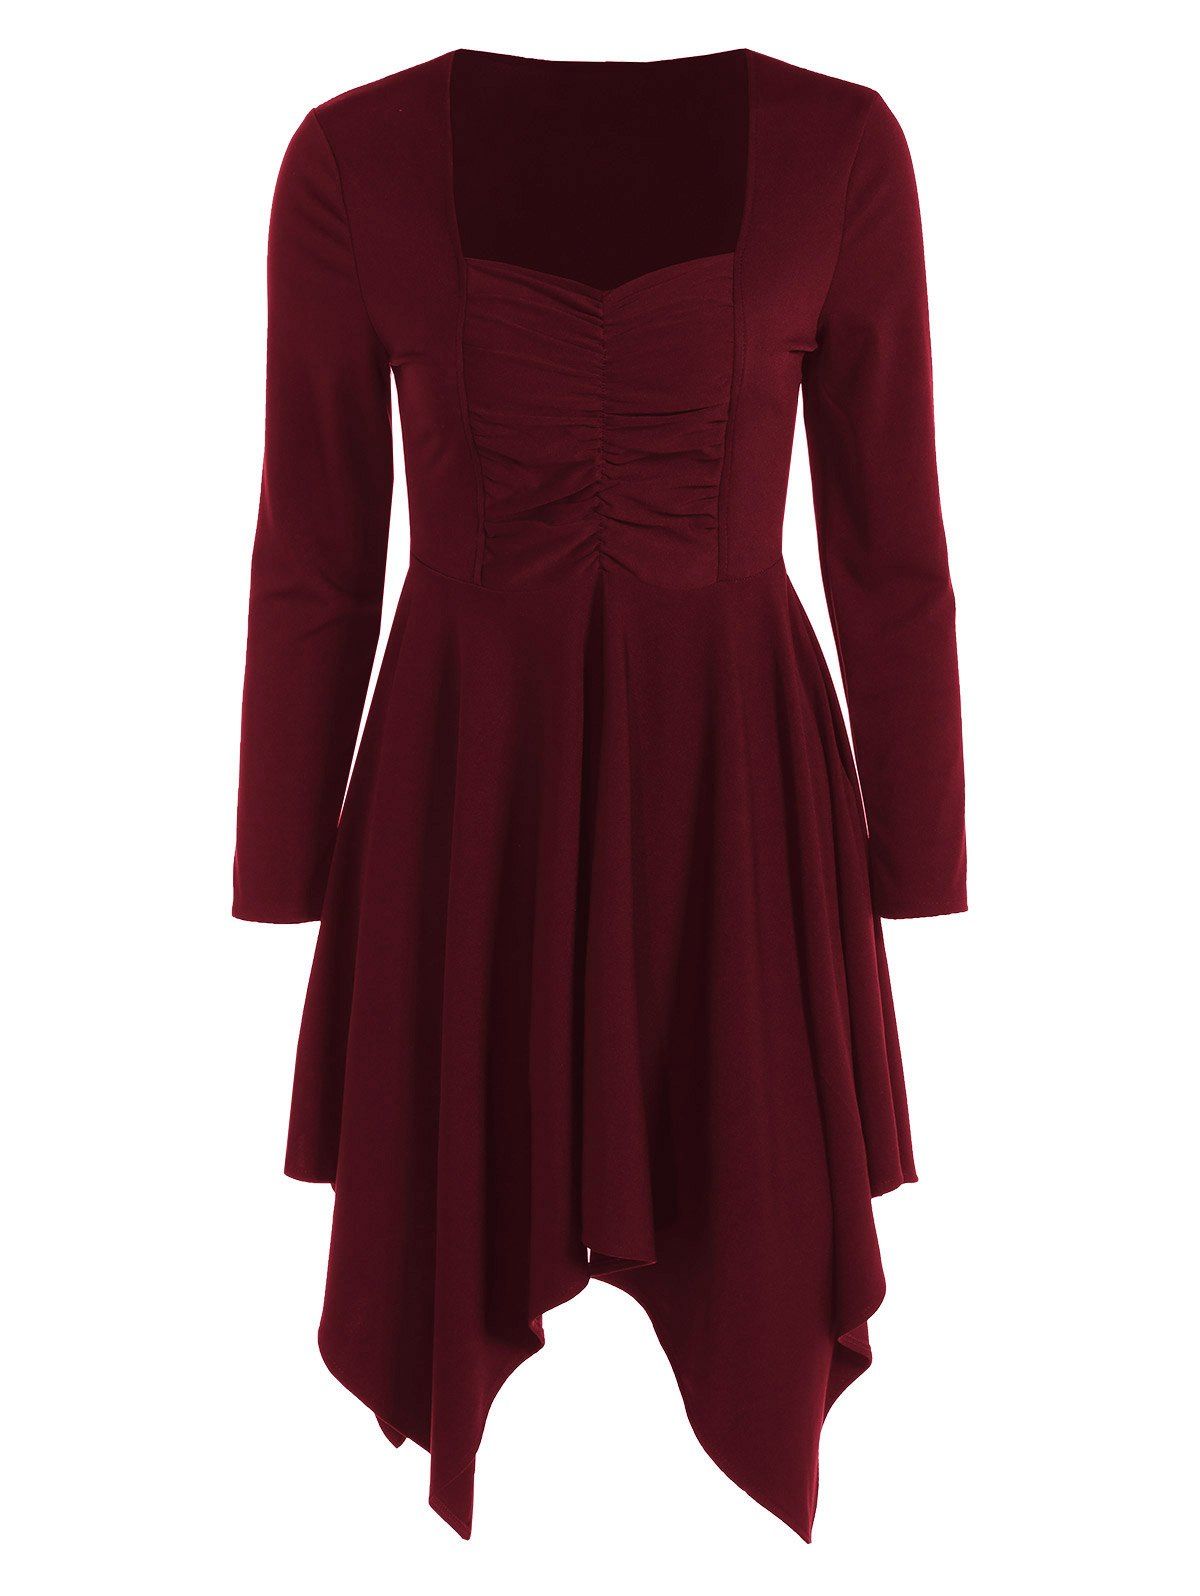 [17% OFF] 2020 Long Sleeves Ruched Asymmetric Swing Dress In BURGUNDY ...